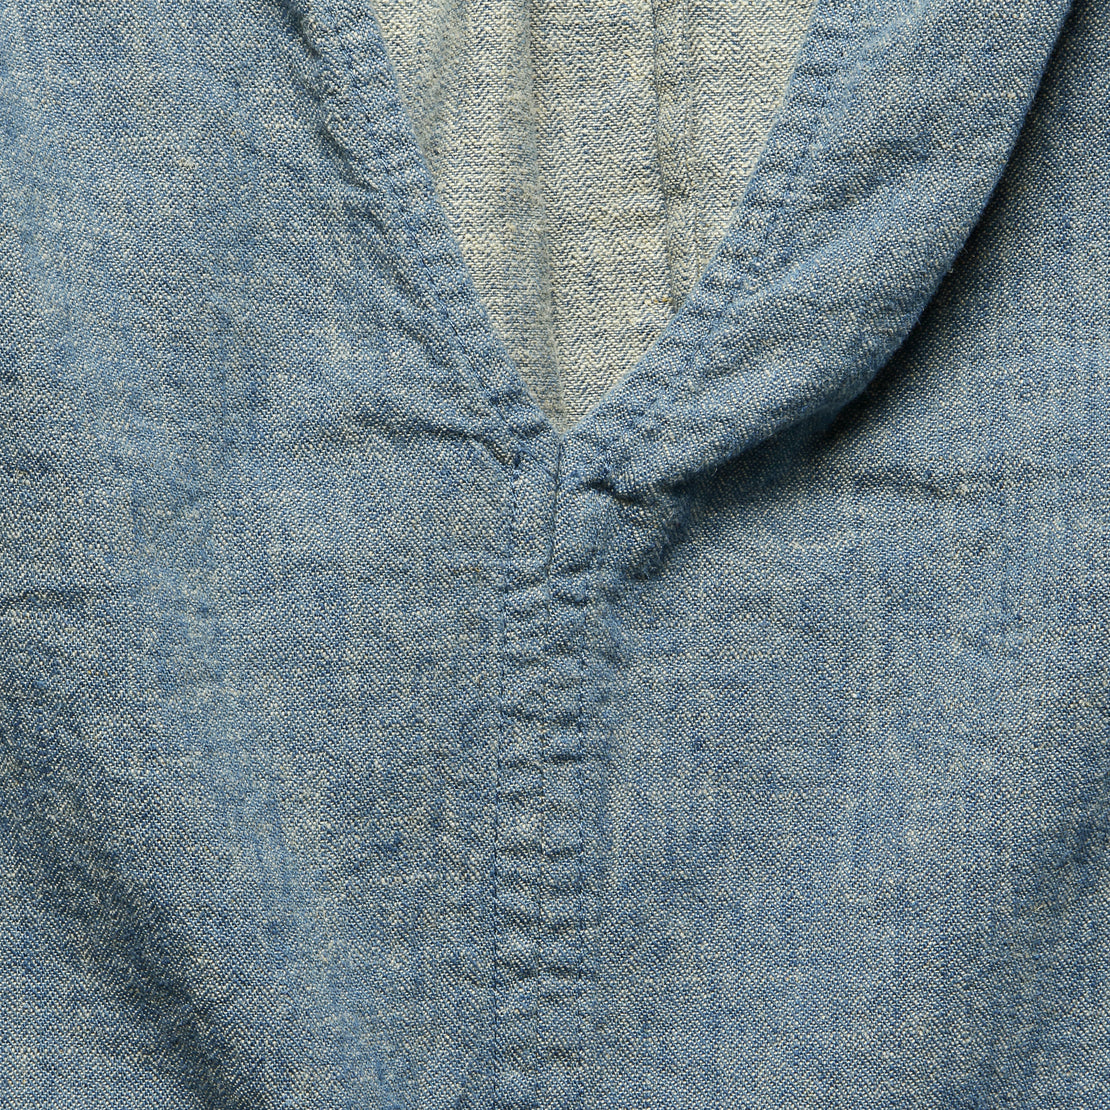 Lily Top - Chambray Herringbone - Esby - STAG Provisions - W - Tops - S/S Woven